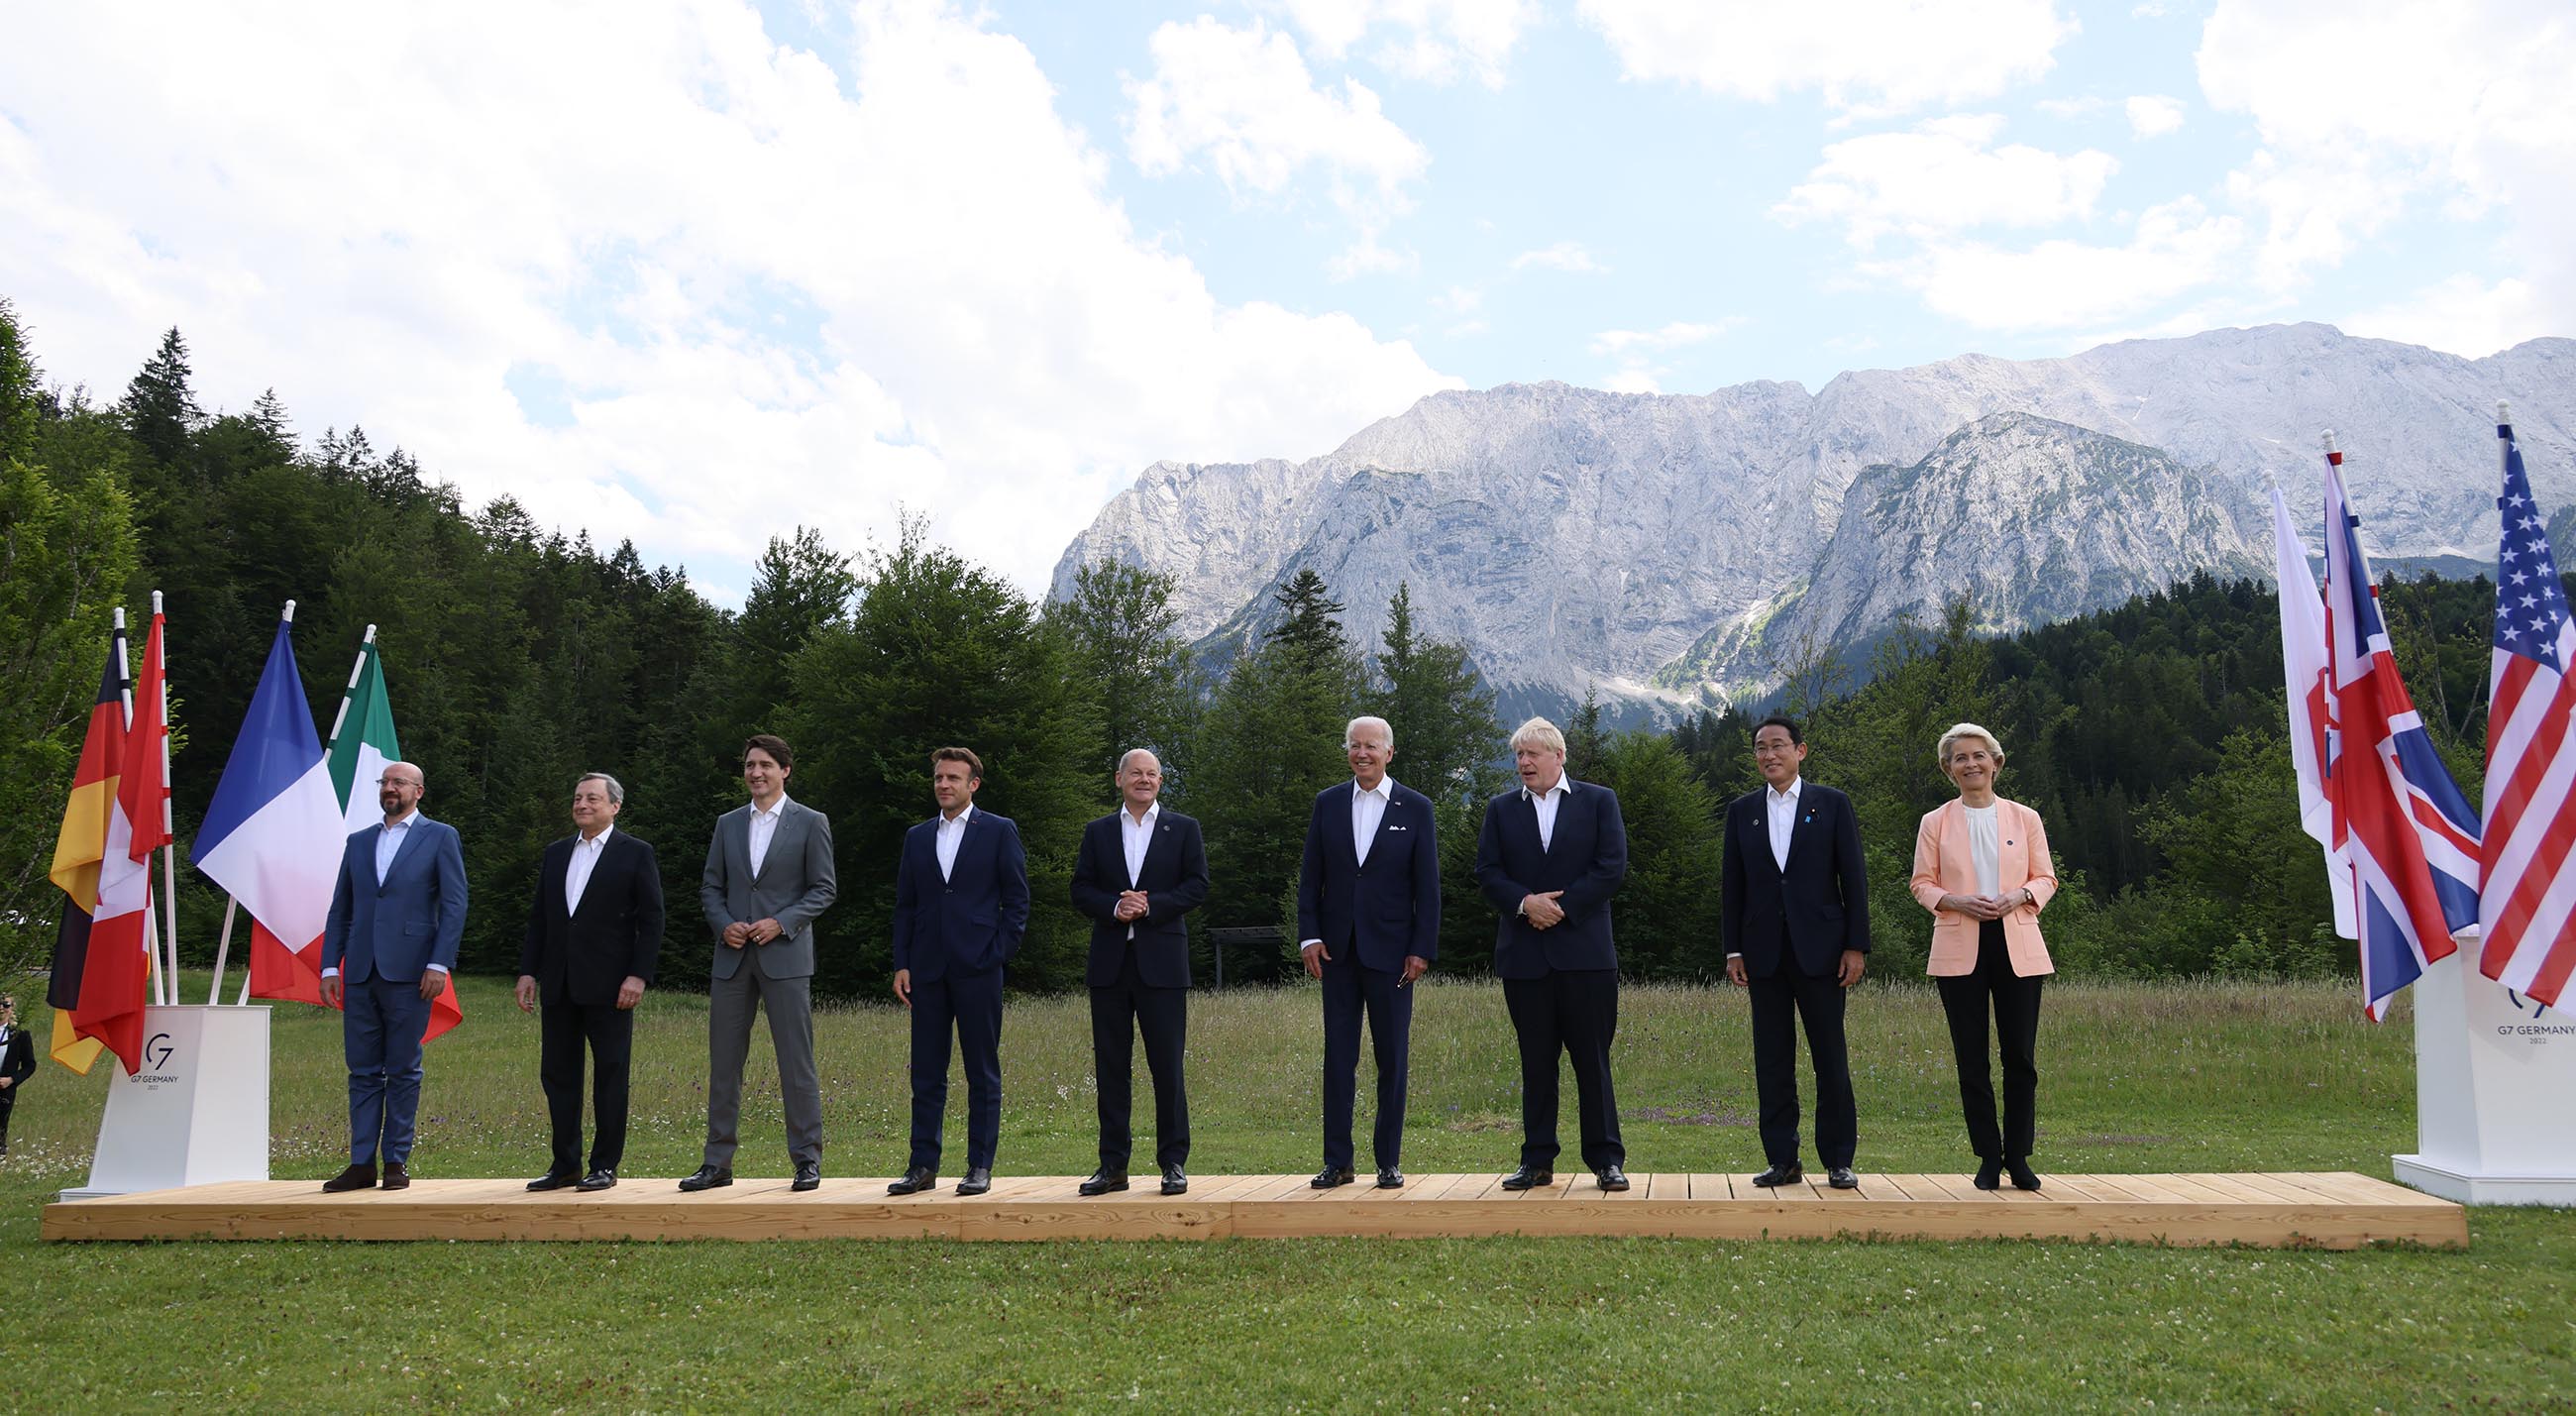 Photograph of a group photo session with the G7 leaders (1)